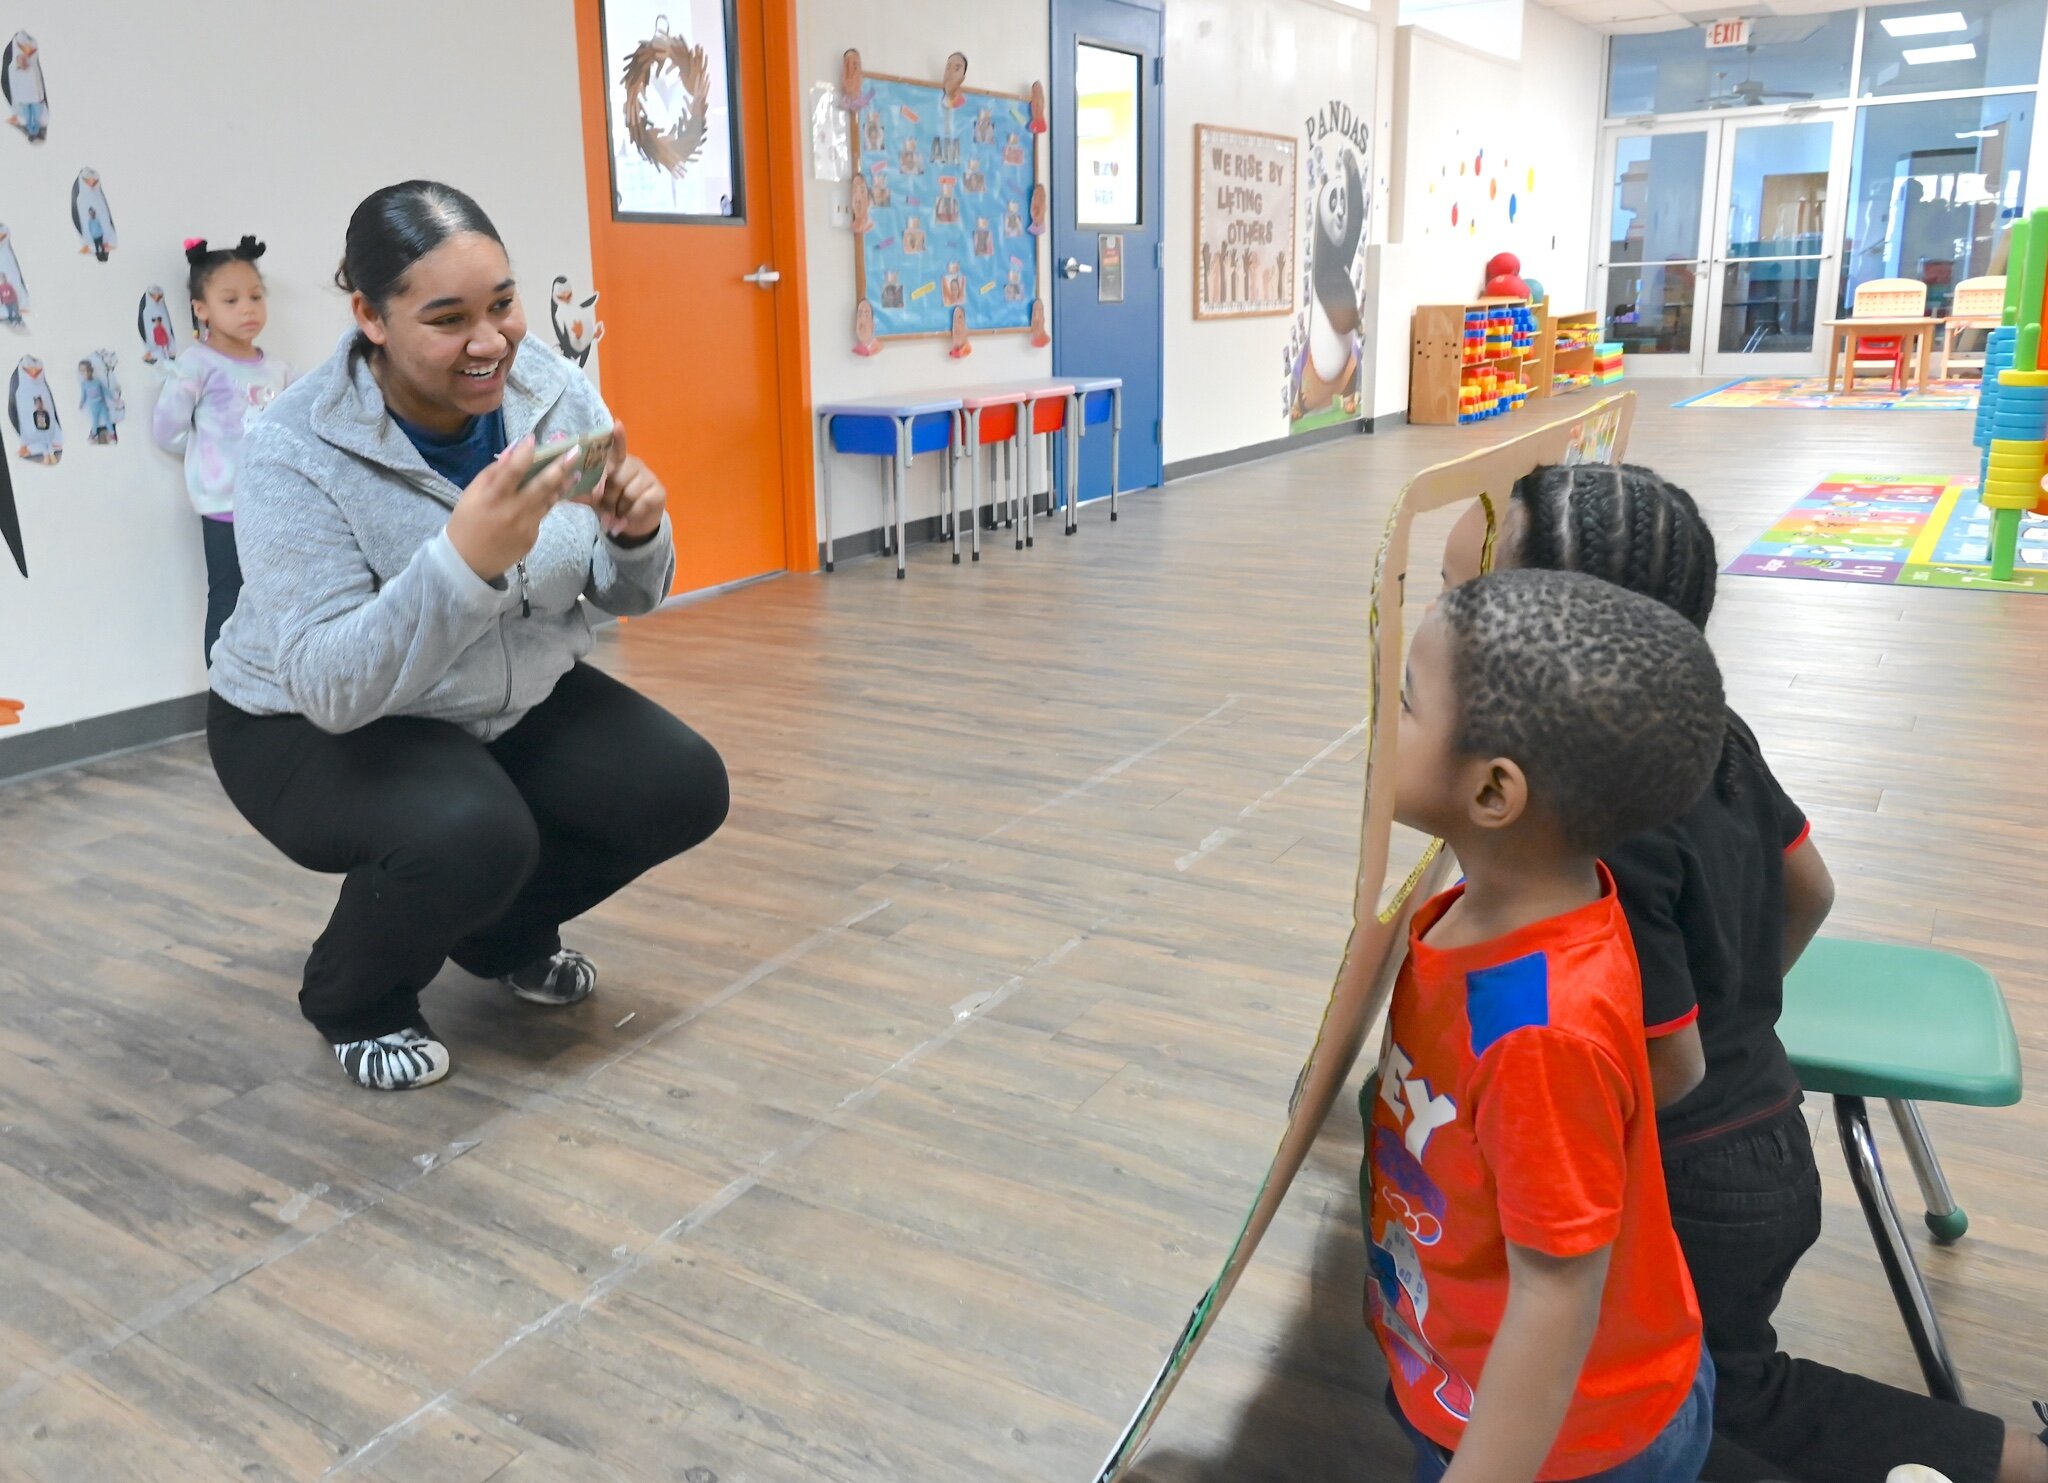 Naziah Feaster takes a photo of young children at New Harvest Christian’s Learning Center.